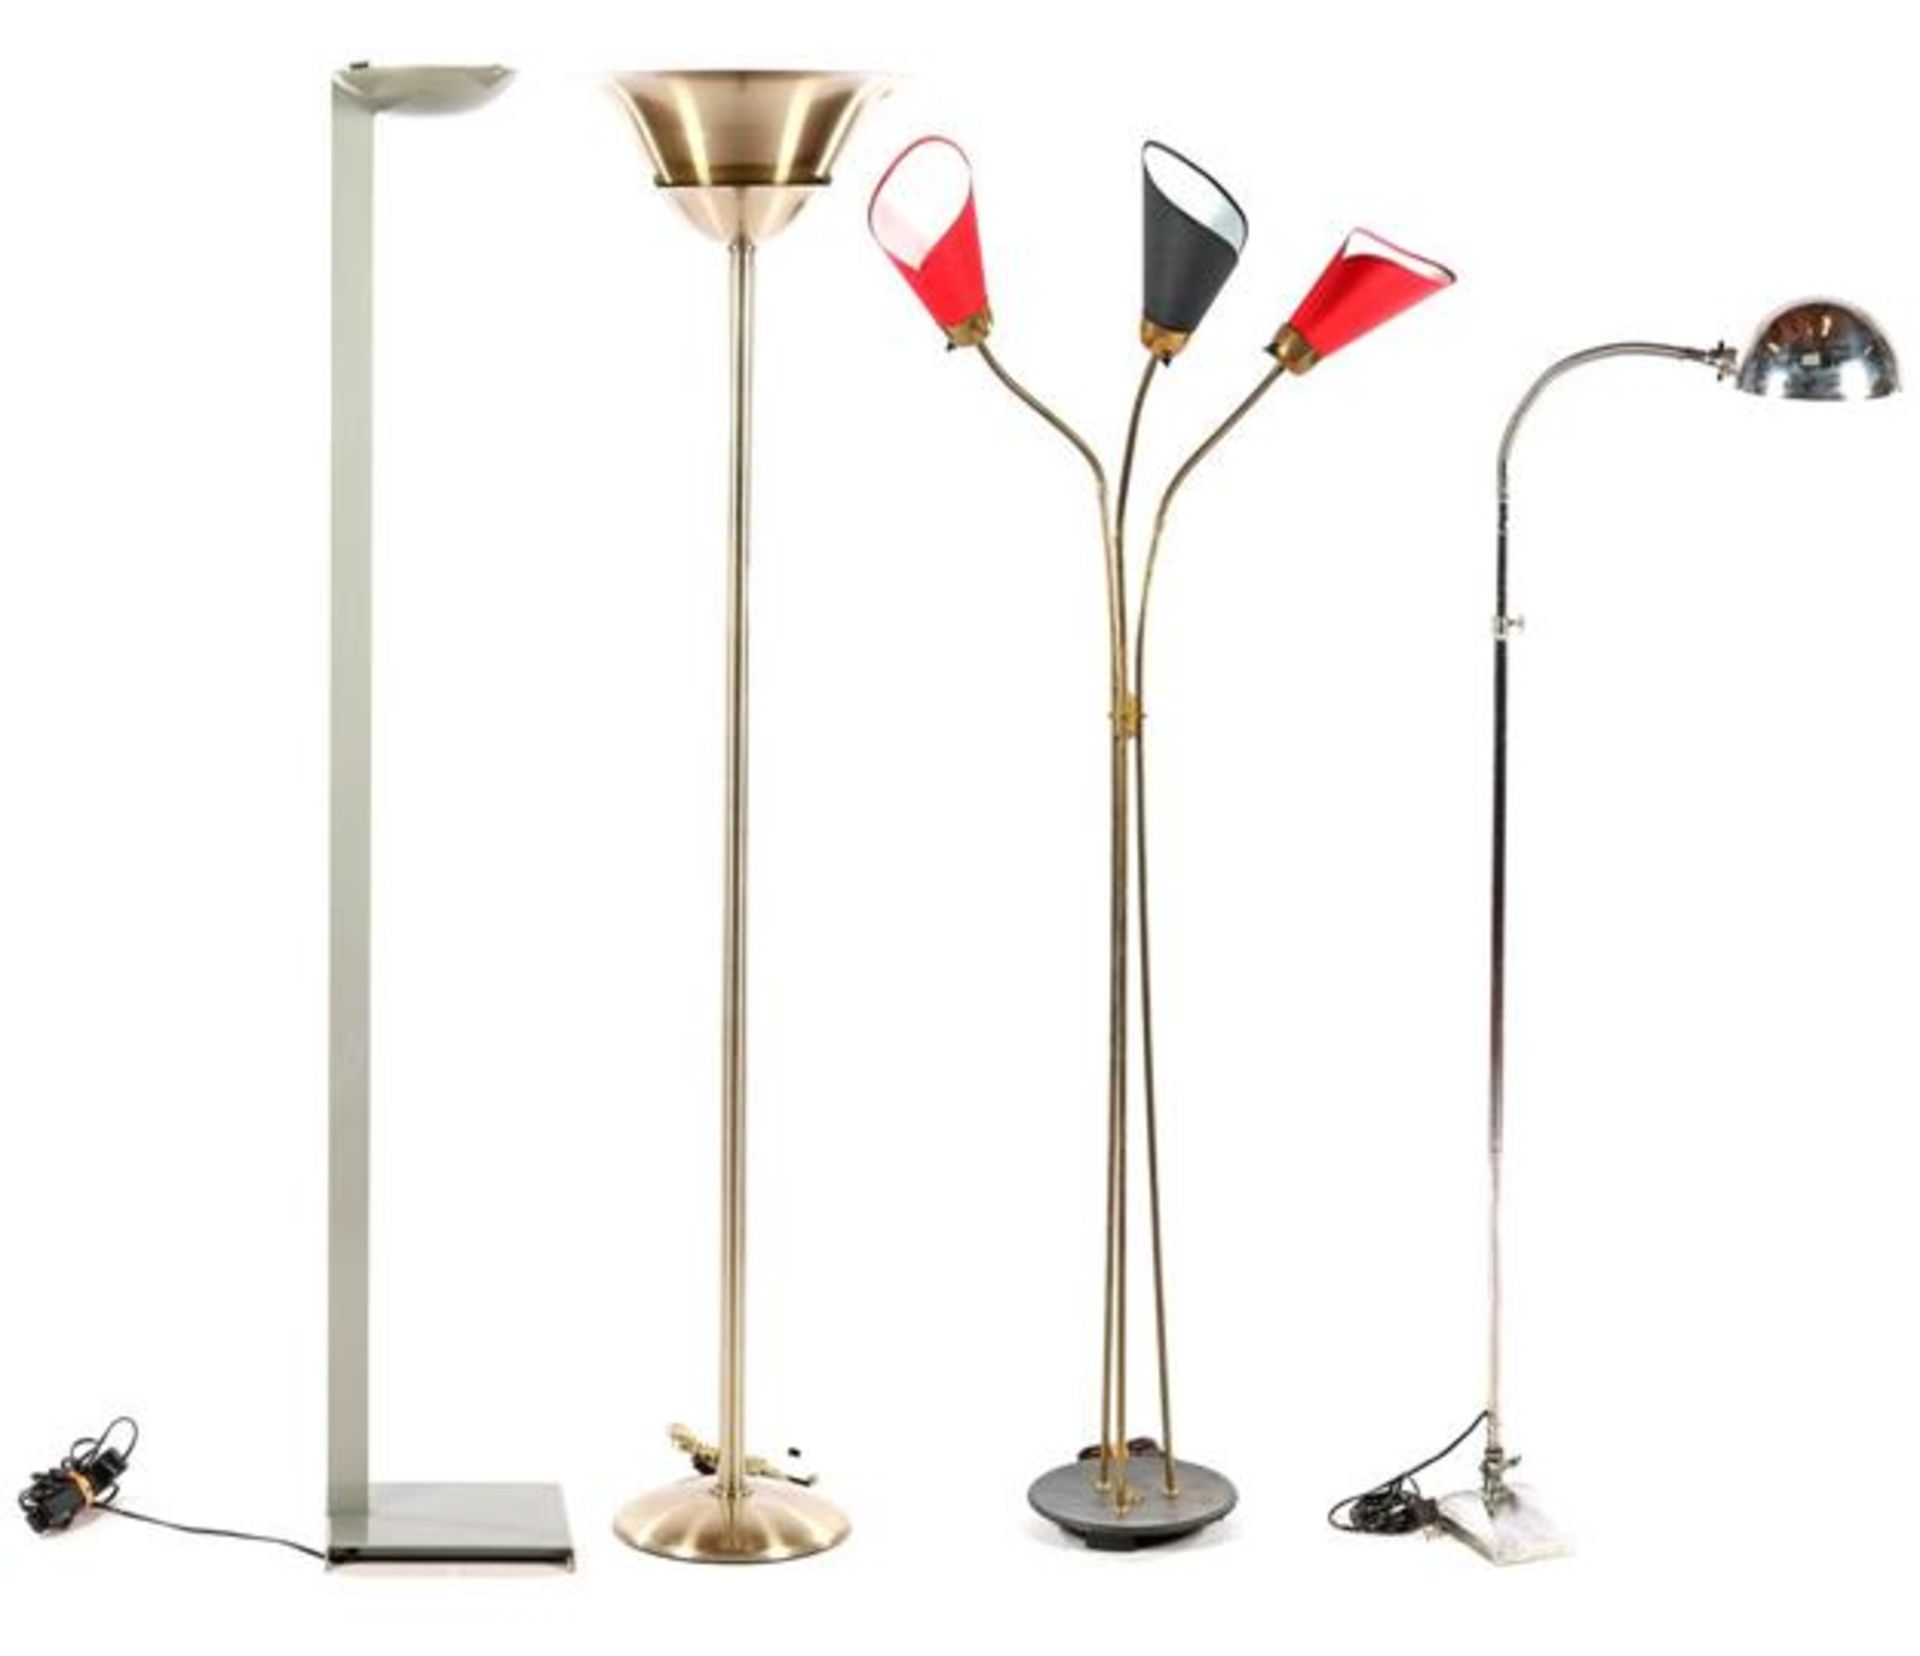 3 metal & nbsp; floor lamps incl. Gispen, 2 x 176 cm high and approx. 135 cm high, and copper